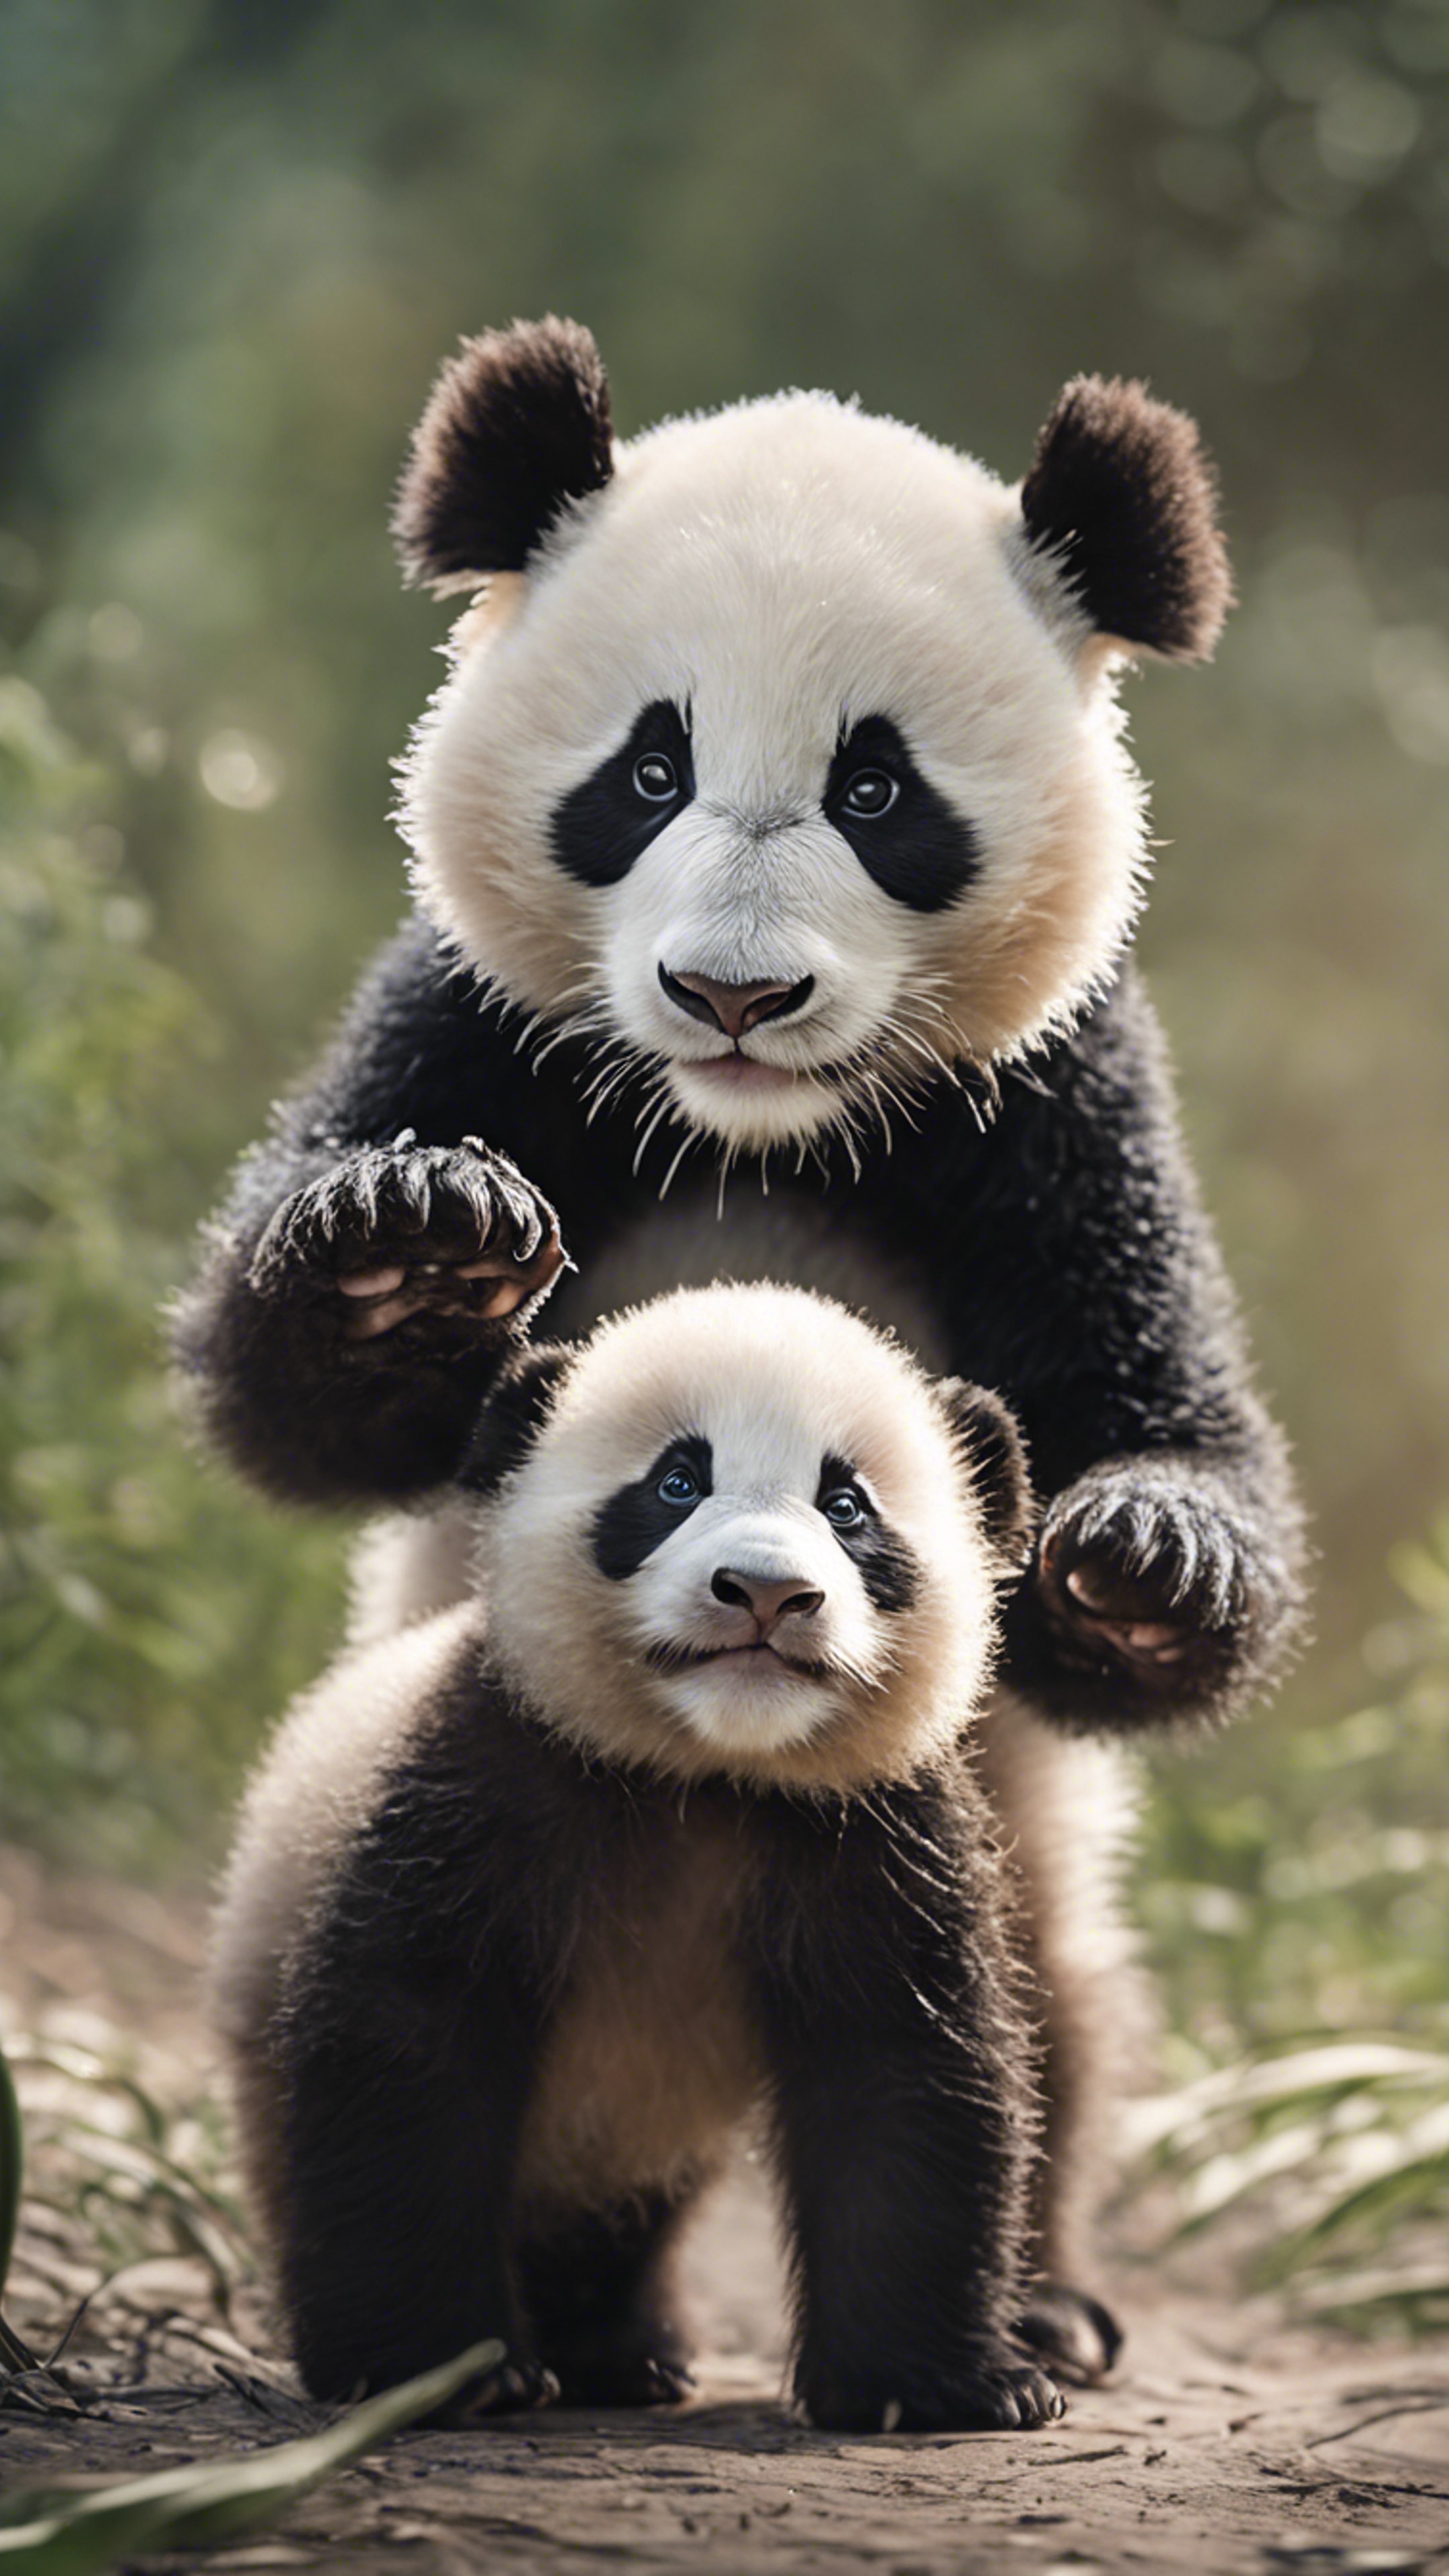 A newborn panda cub learning to walk, under the loving guidance of its mother. Behang[d326db7fc4d14111aedf]